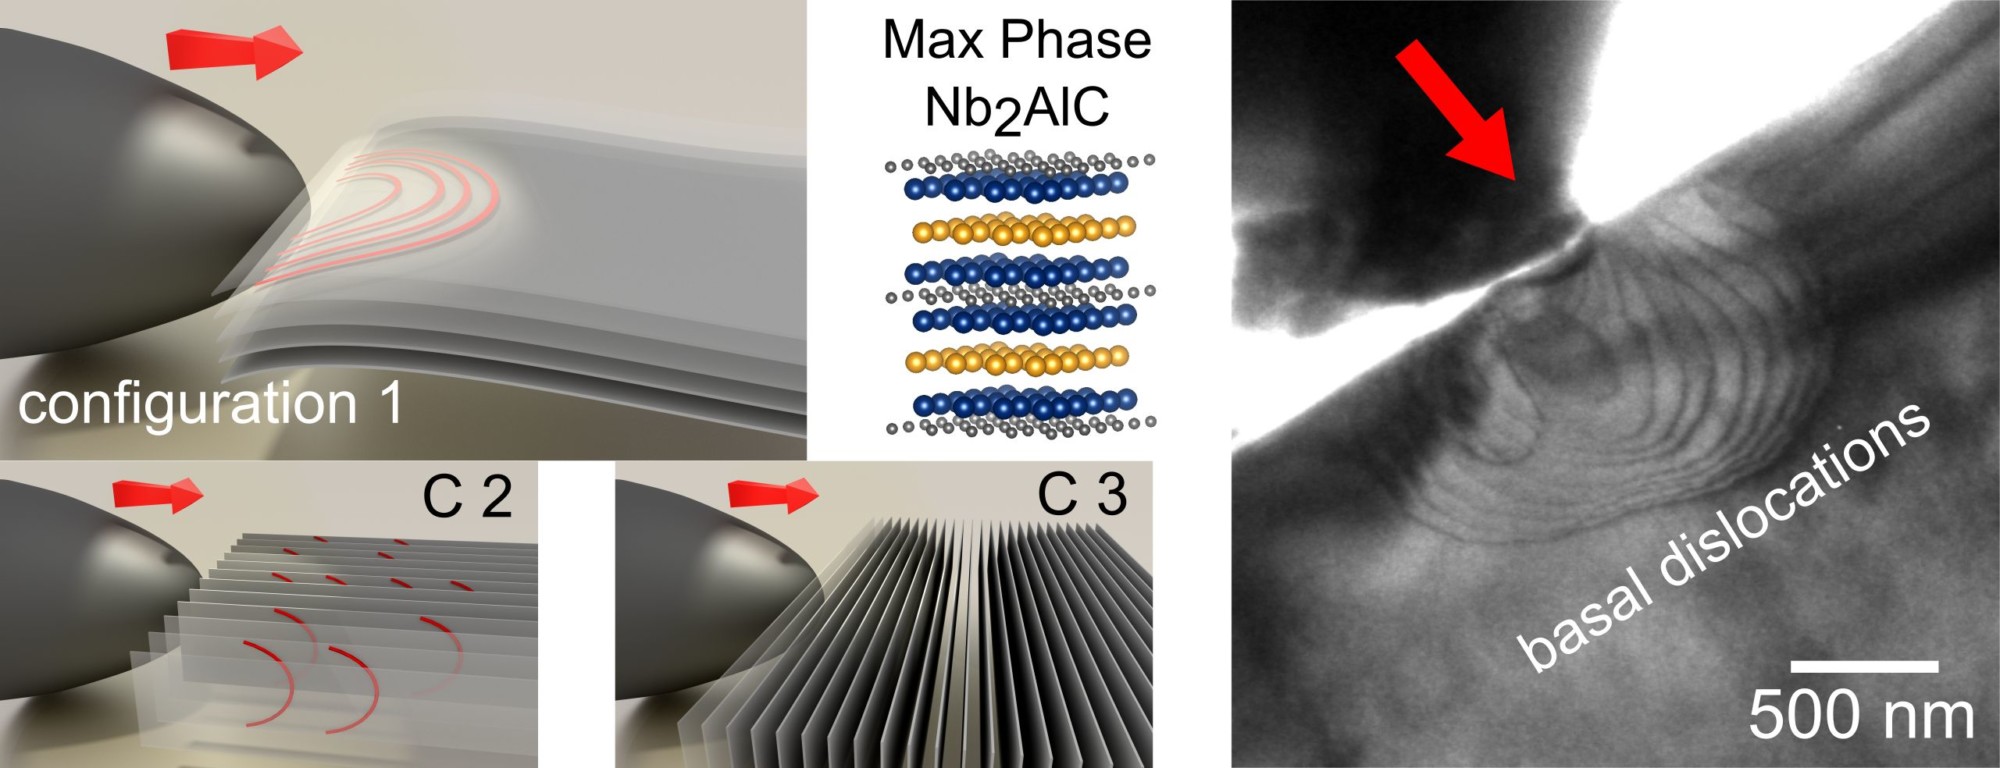 Direct observation of nucleation and propagation of basal plane dislocations in Nb2AlC, a member of MAX phases.